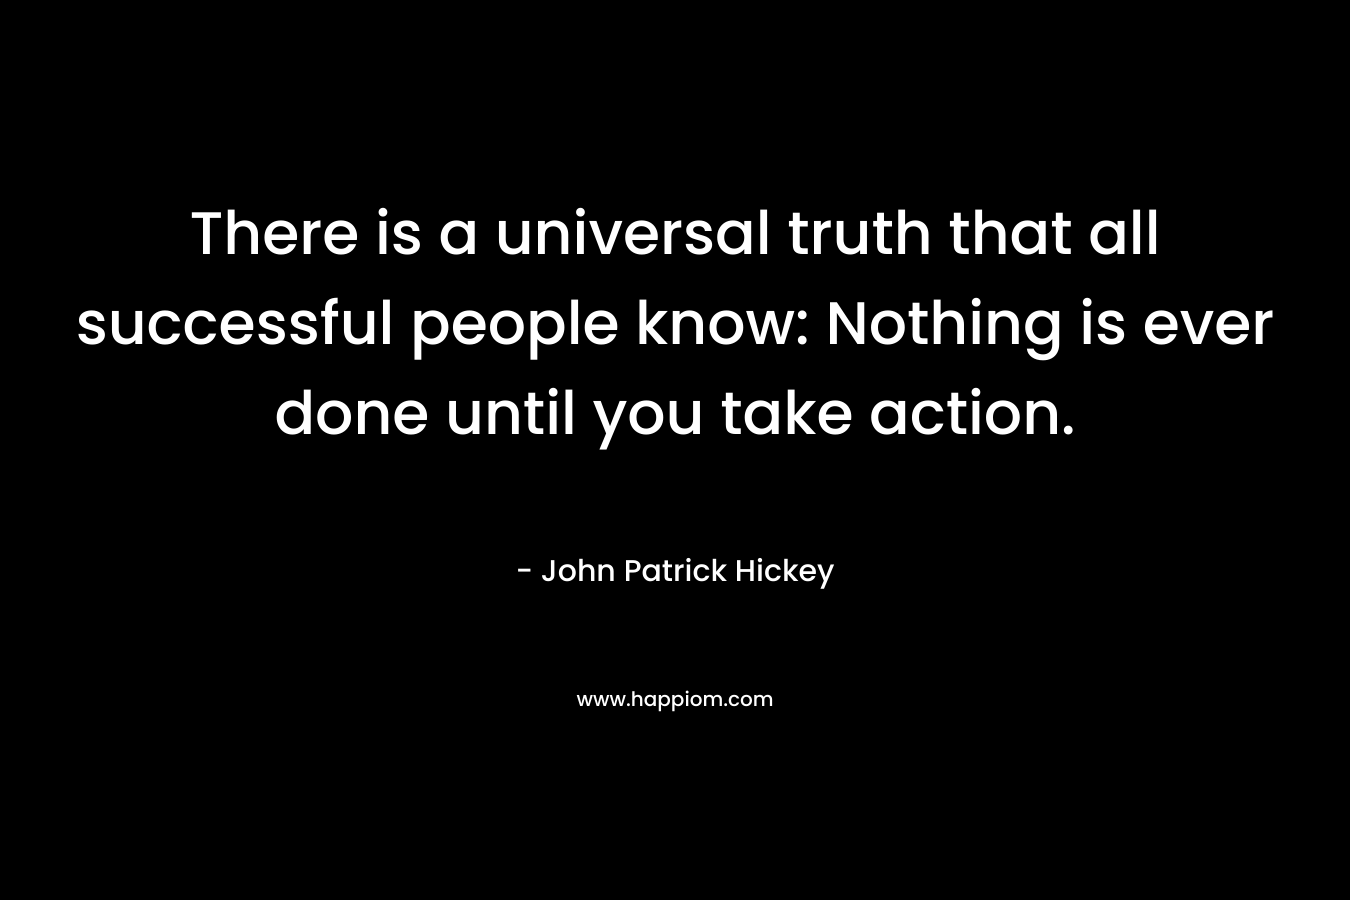 There is a universal truth that all successful people know: Nothing is ever done until you take action.